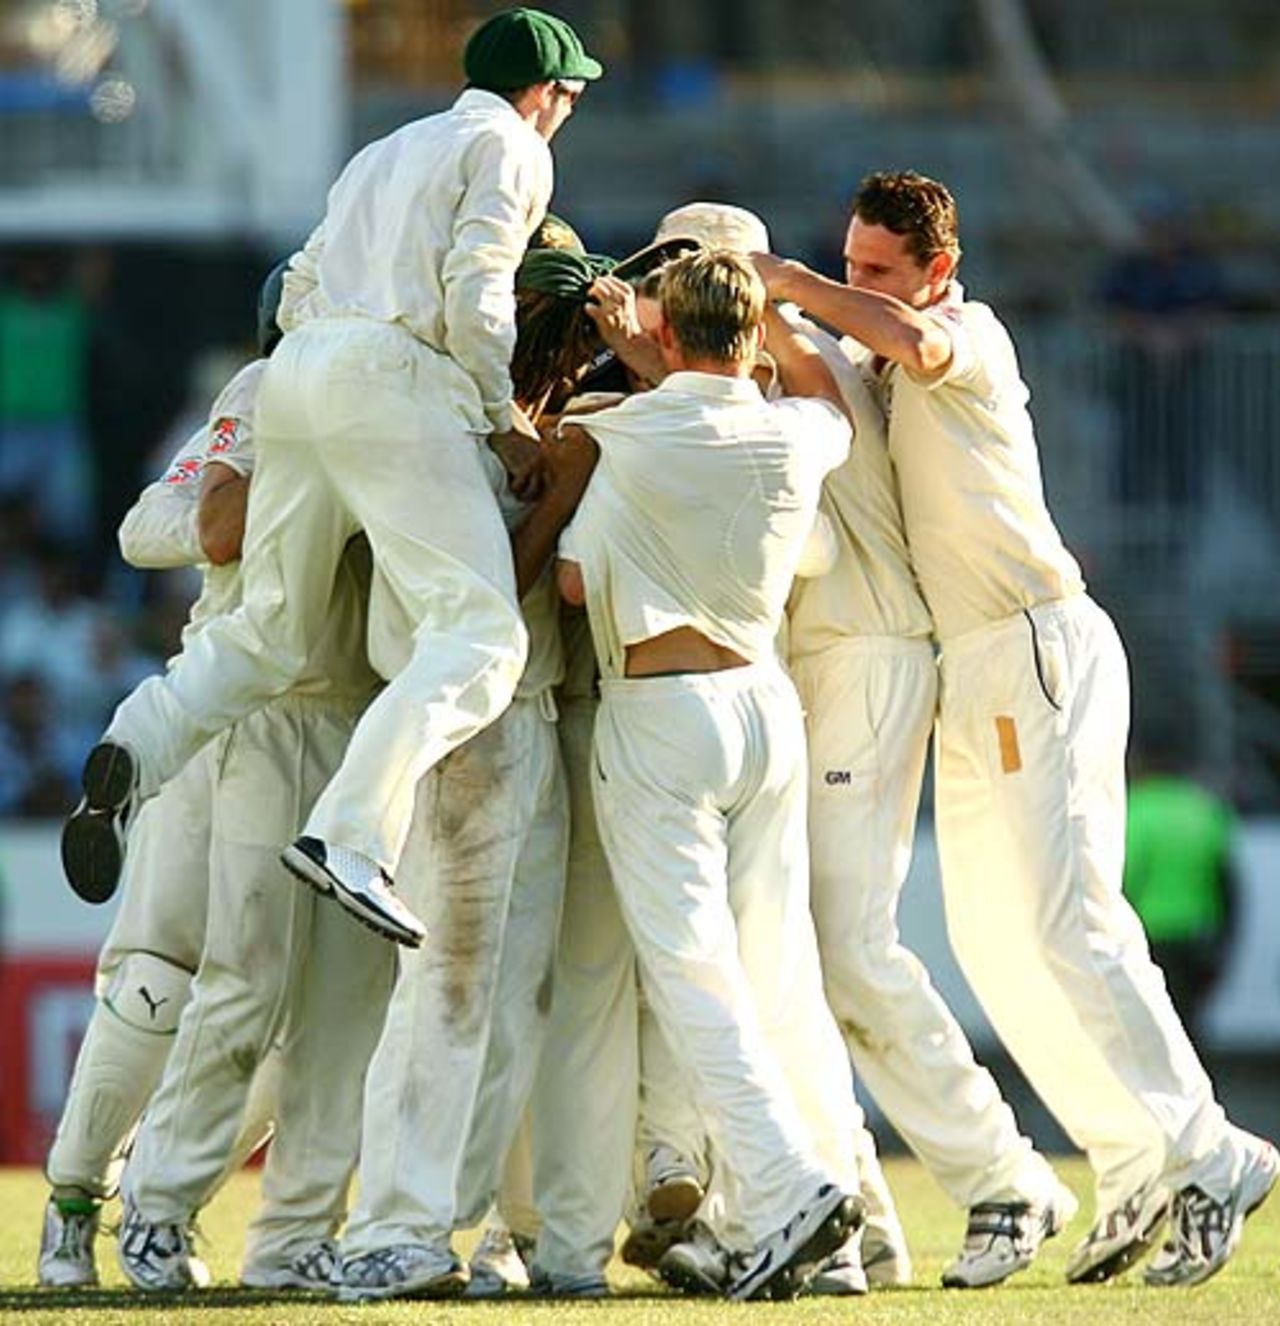 The Australians huddle up after the 16th consecutive Test win, Australia v India, 2nd Test, Sydney, 5th day, January 6, 2008